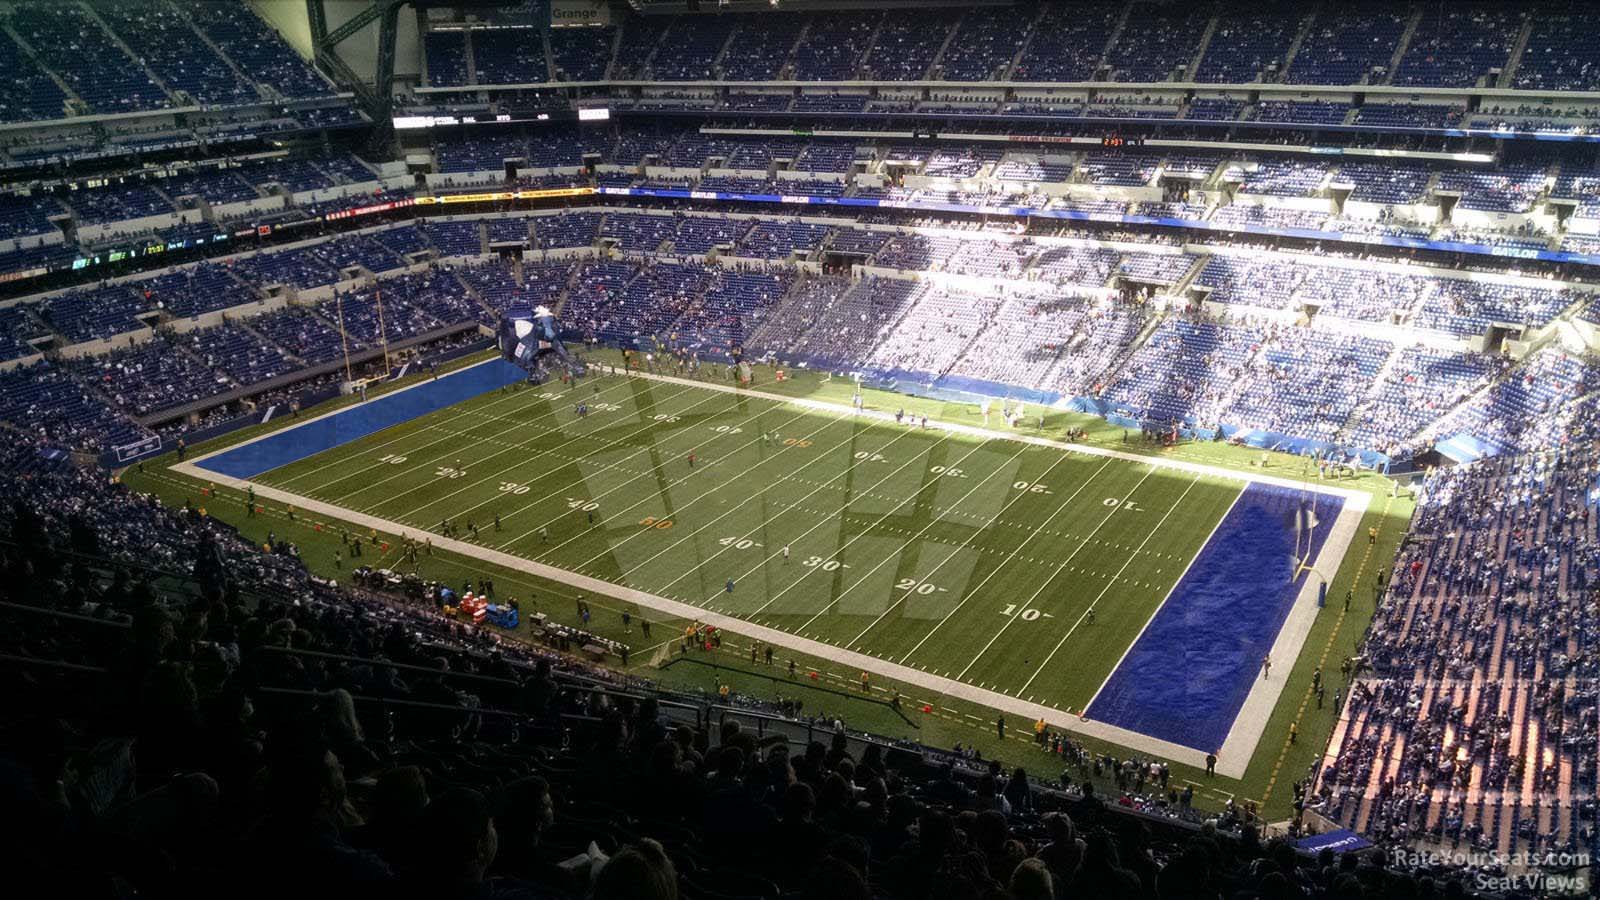 section 608, row 20 seat view  for football - lucas oil stadium